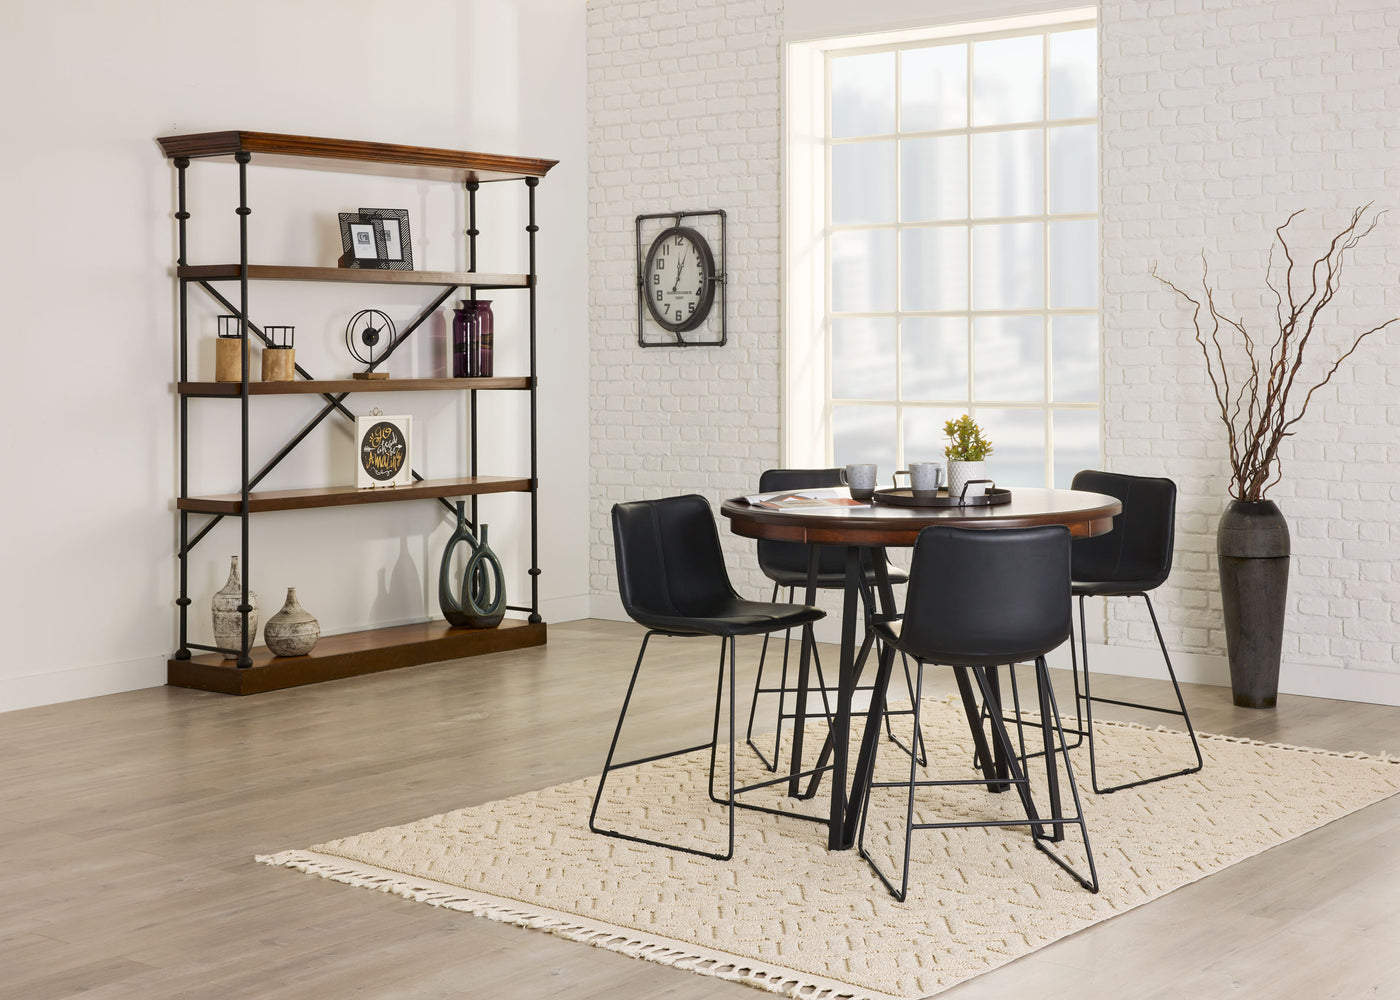 Leo 5-Piece Counter-Height Dining Set - Brown Cherry, Black